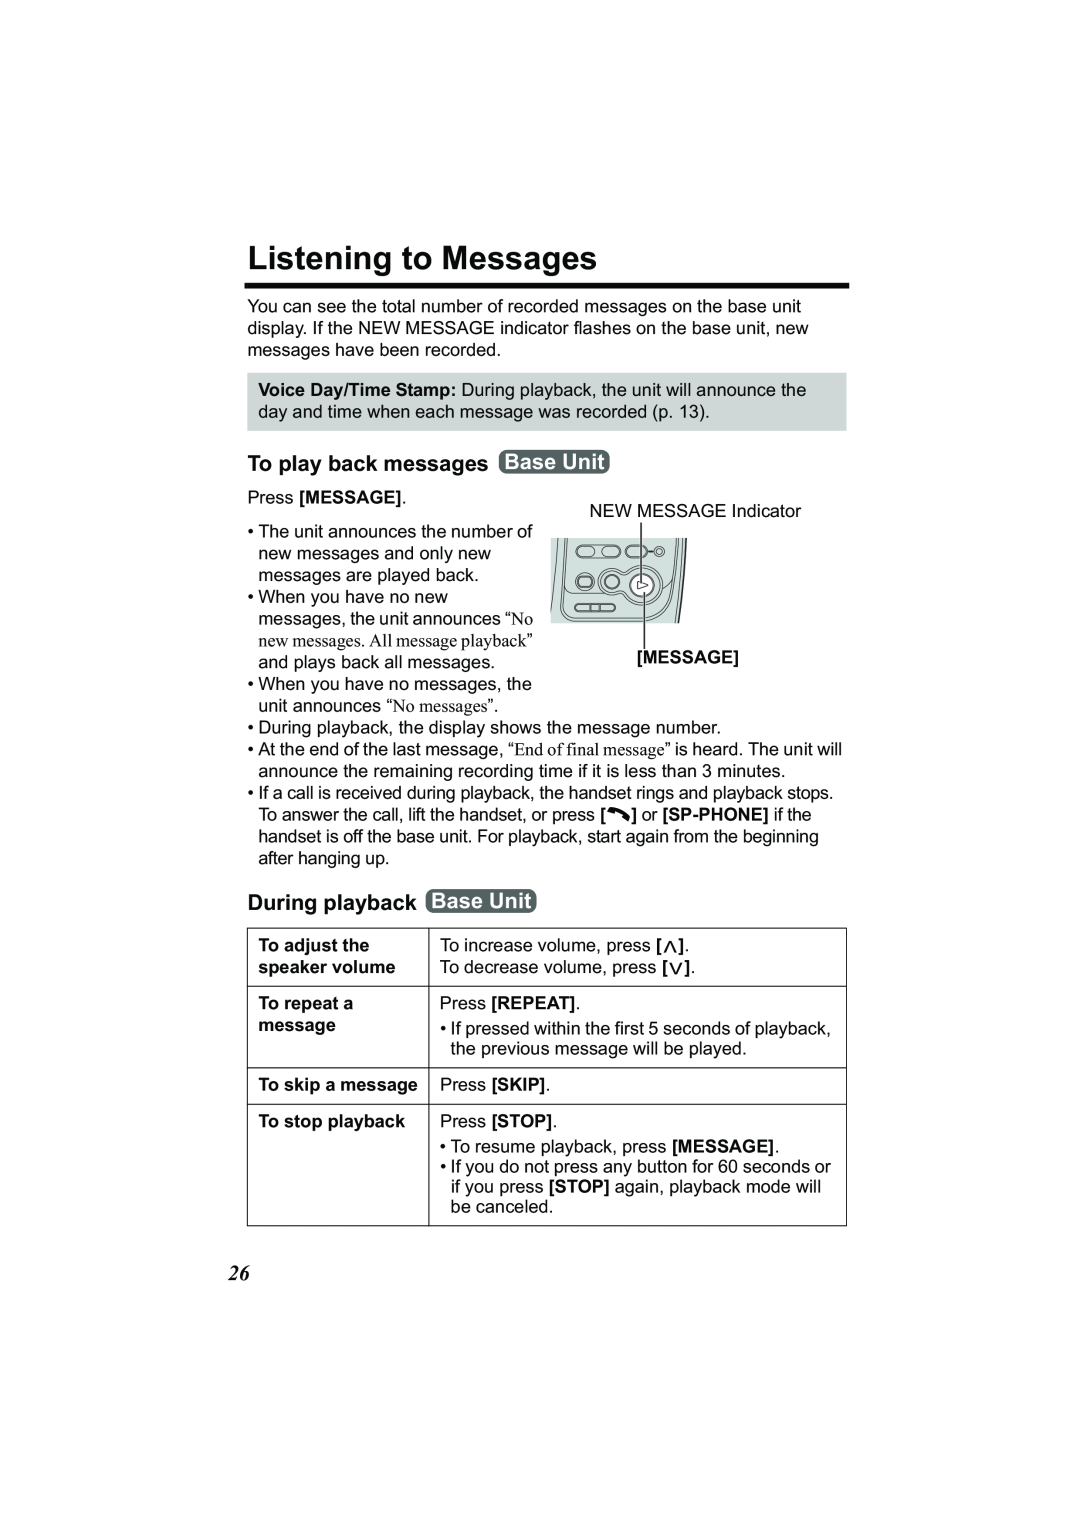 Panasonic Acr14CF.tmp manual Listening to Messages, To play back messages Base Unit, During playback 